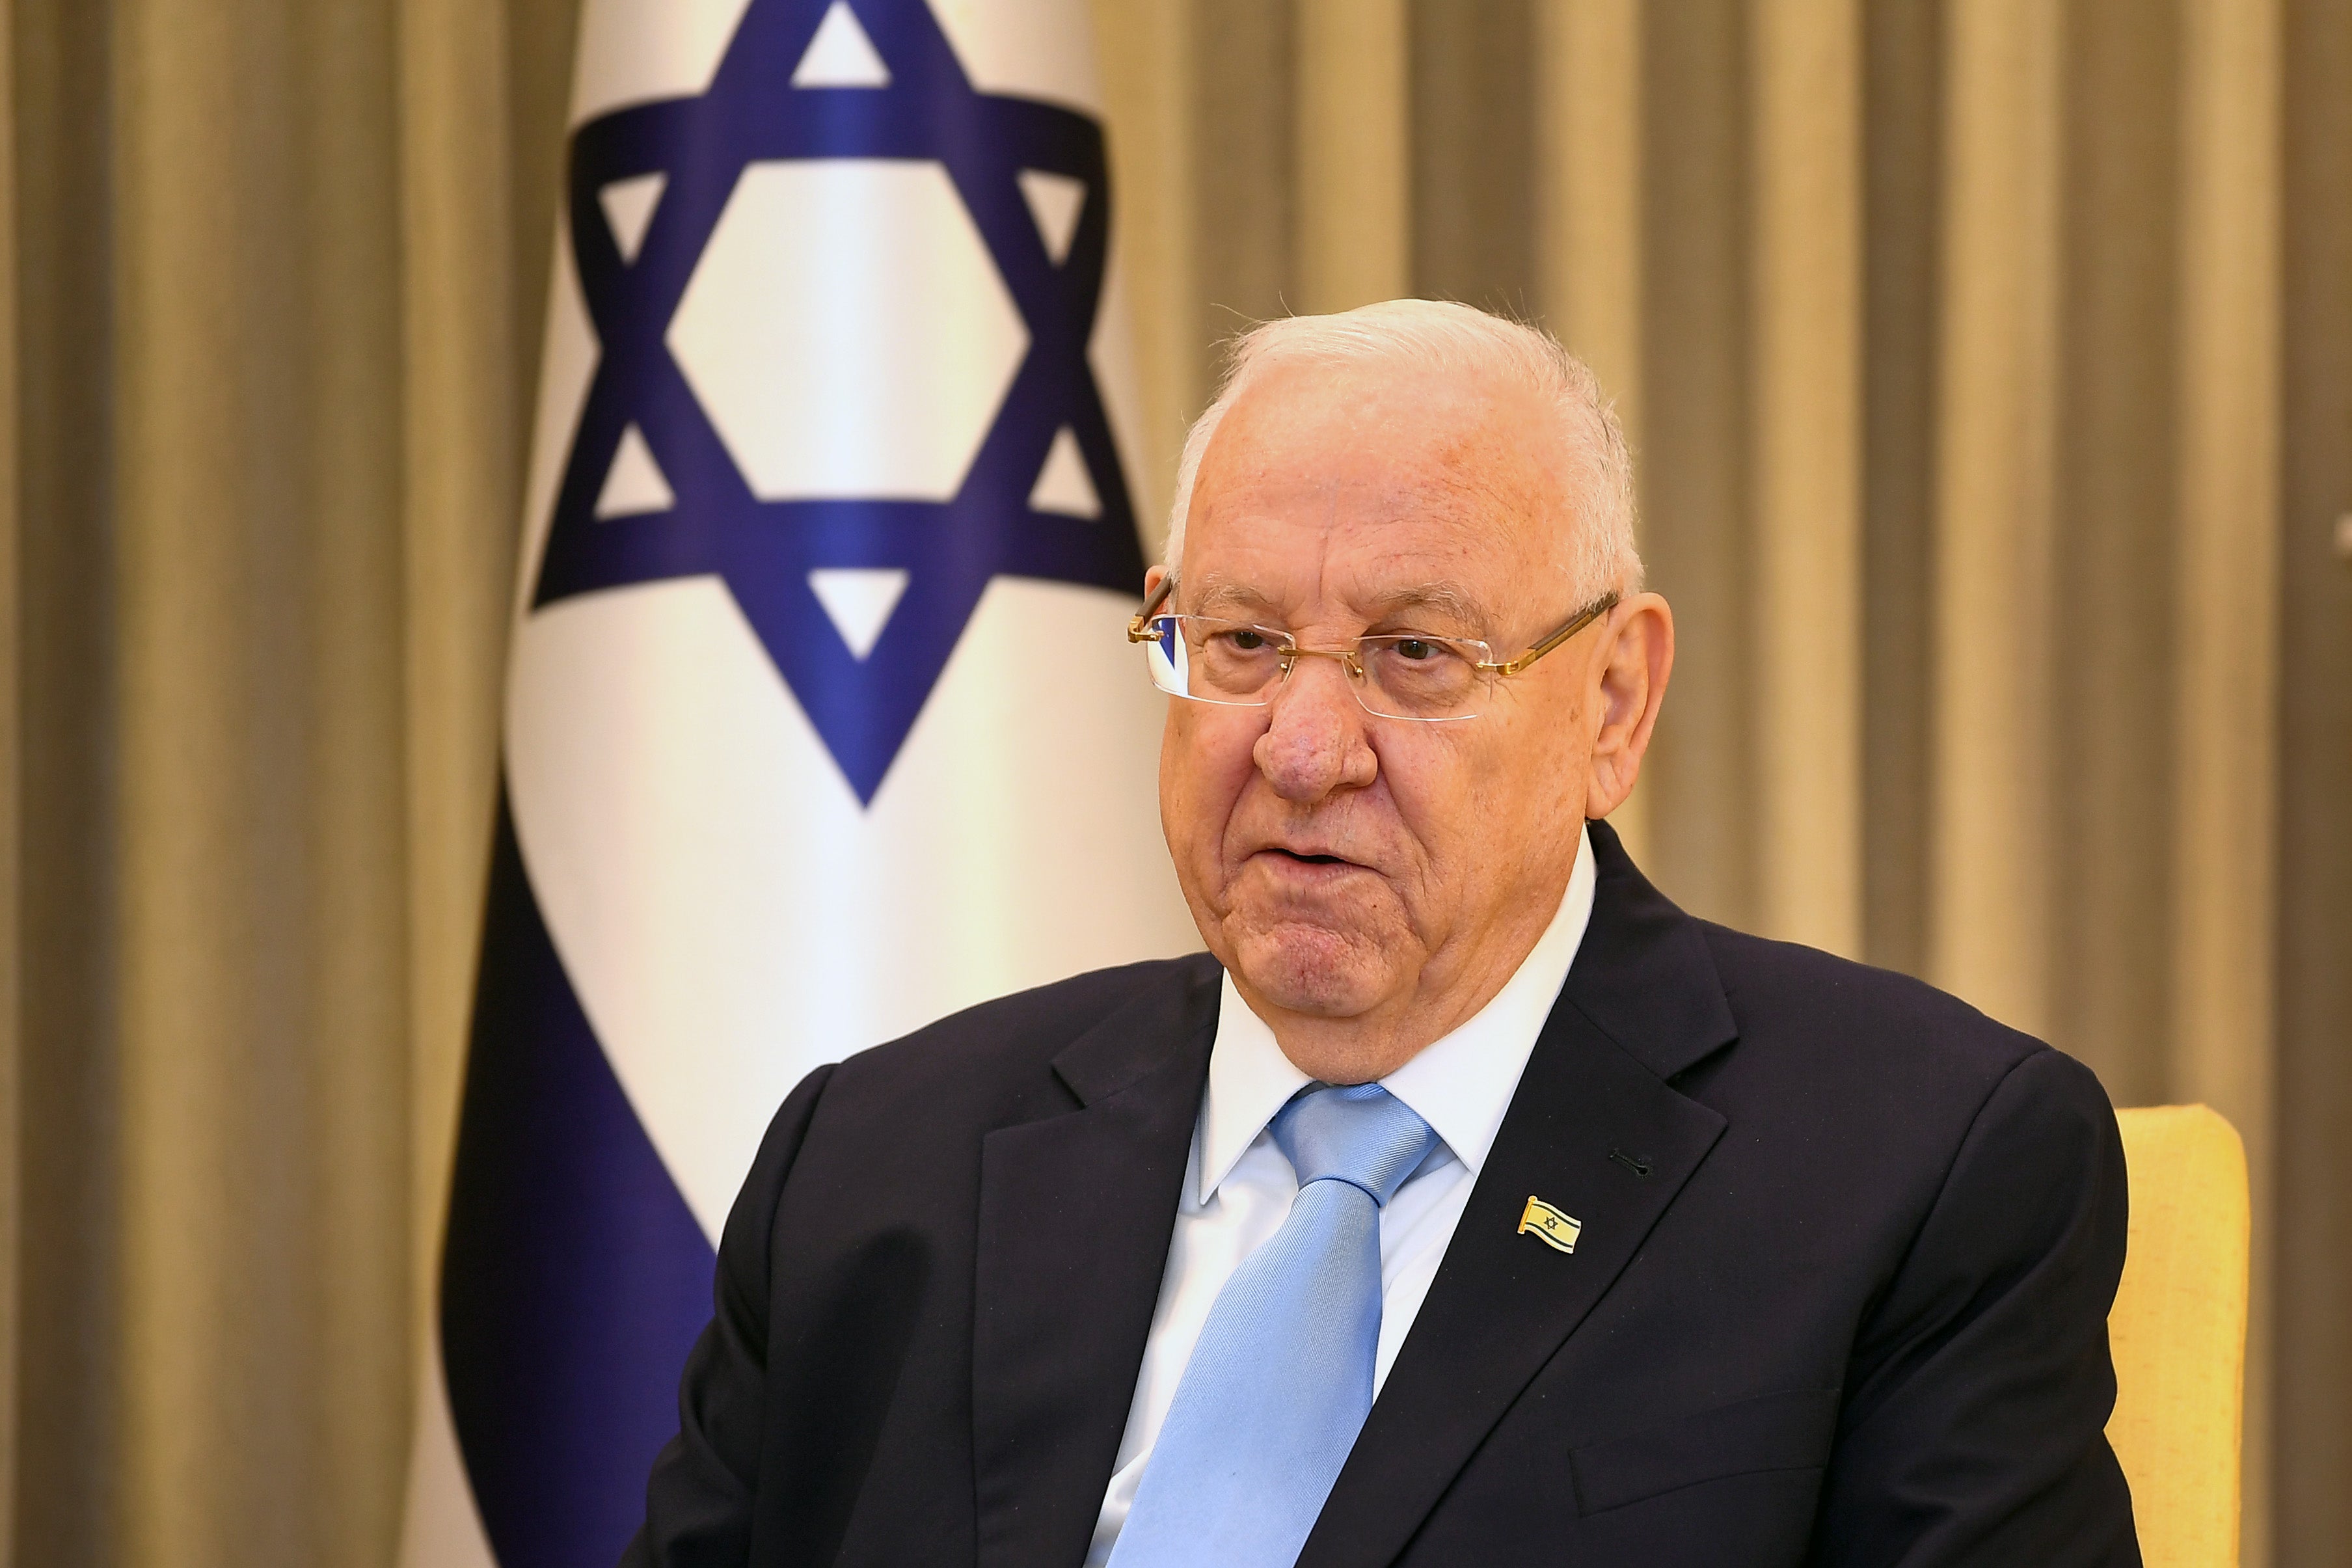 President Reuvin Rivlin has appealed to Prince Charles